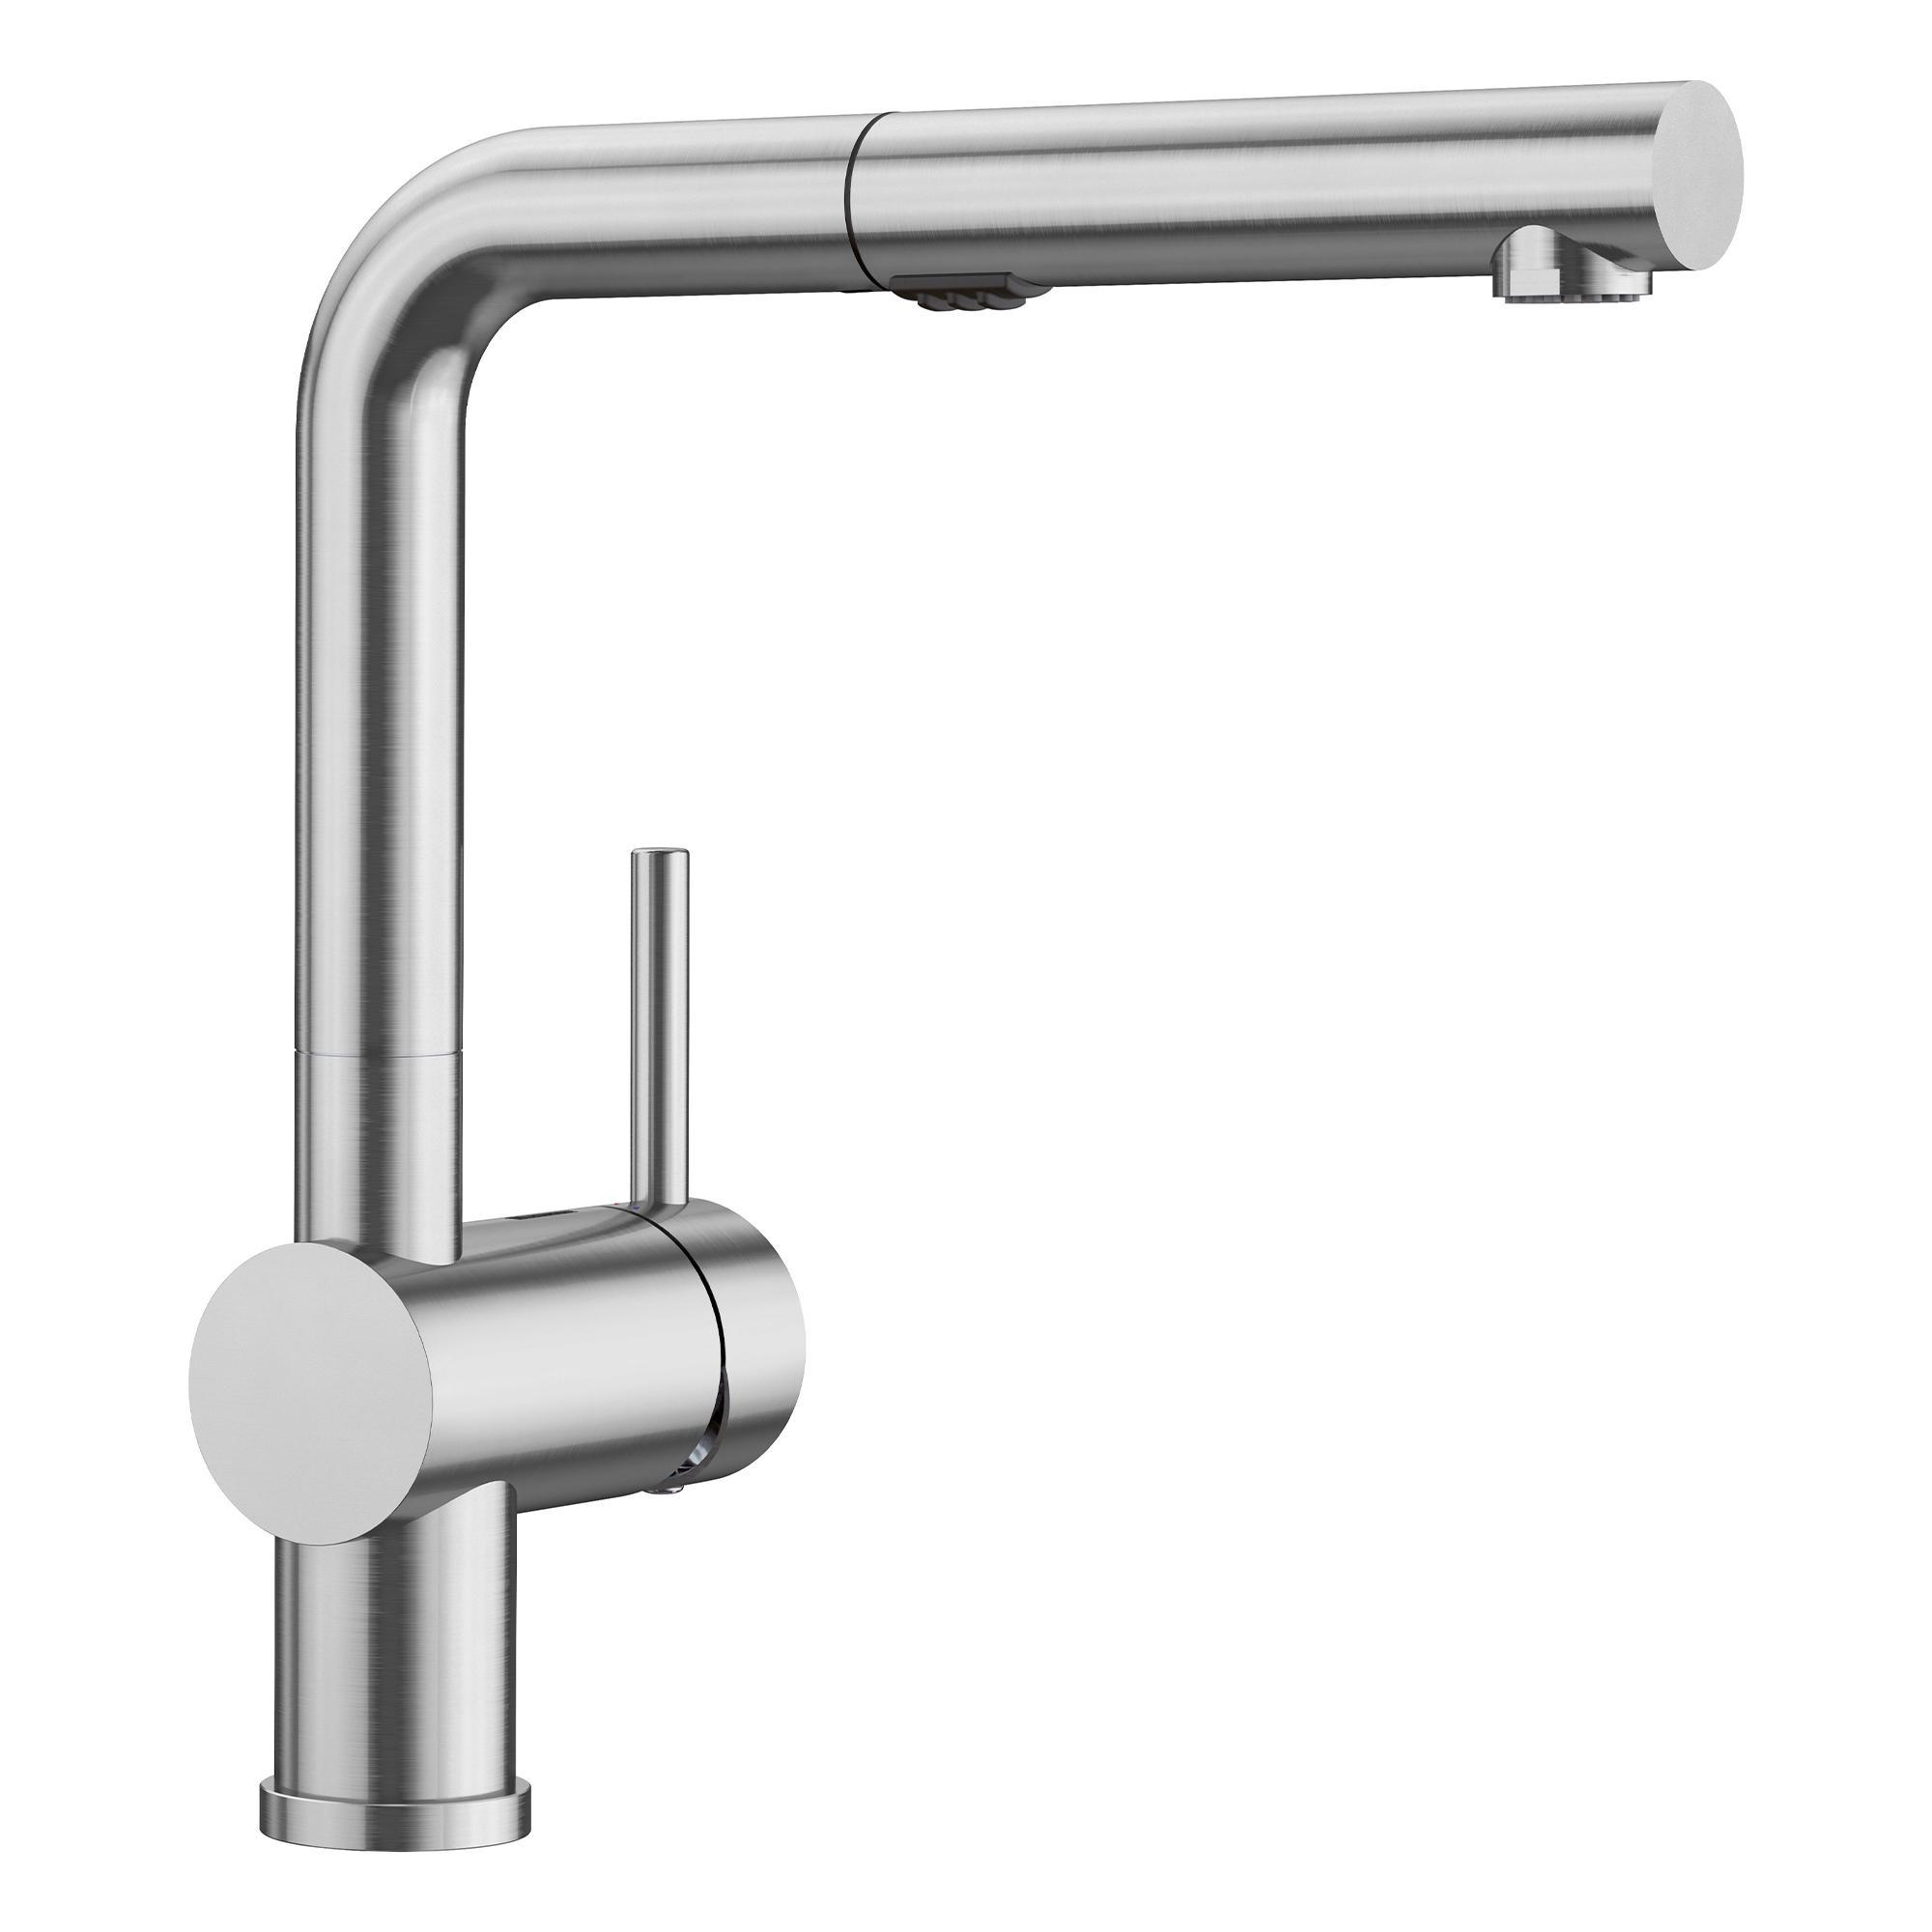 Blanco 526366 LINUS™ Kitchen Faucet, 1.5 gpm Flow Rate, 160 deg Swivel Pull-Out Spout, PVD Steel, 1 Handle, 1 Faucet Hole, Import